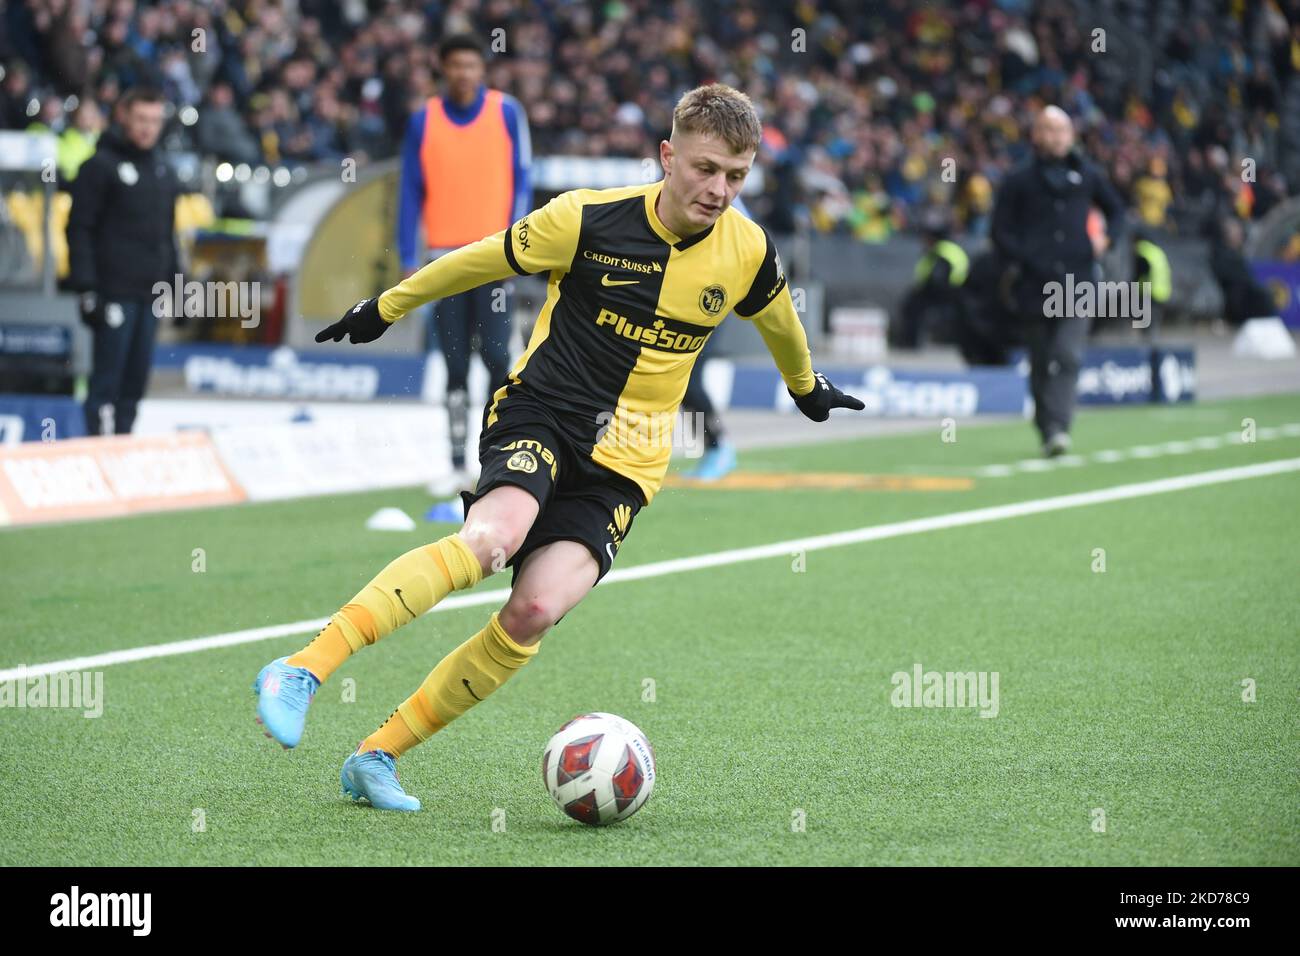 April 9th, 2022, Bern, Wankdorf, Super League: BSC Young Boys - FC Lausanne-Sport, #27 Lewin Blum (Young Boys). (Photo by Manuel Winterberger/JustPictures/LiveMedia/NurPhoto) NO USE SWITZERLAND. Stock Photo